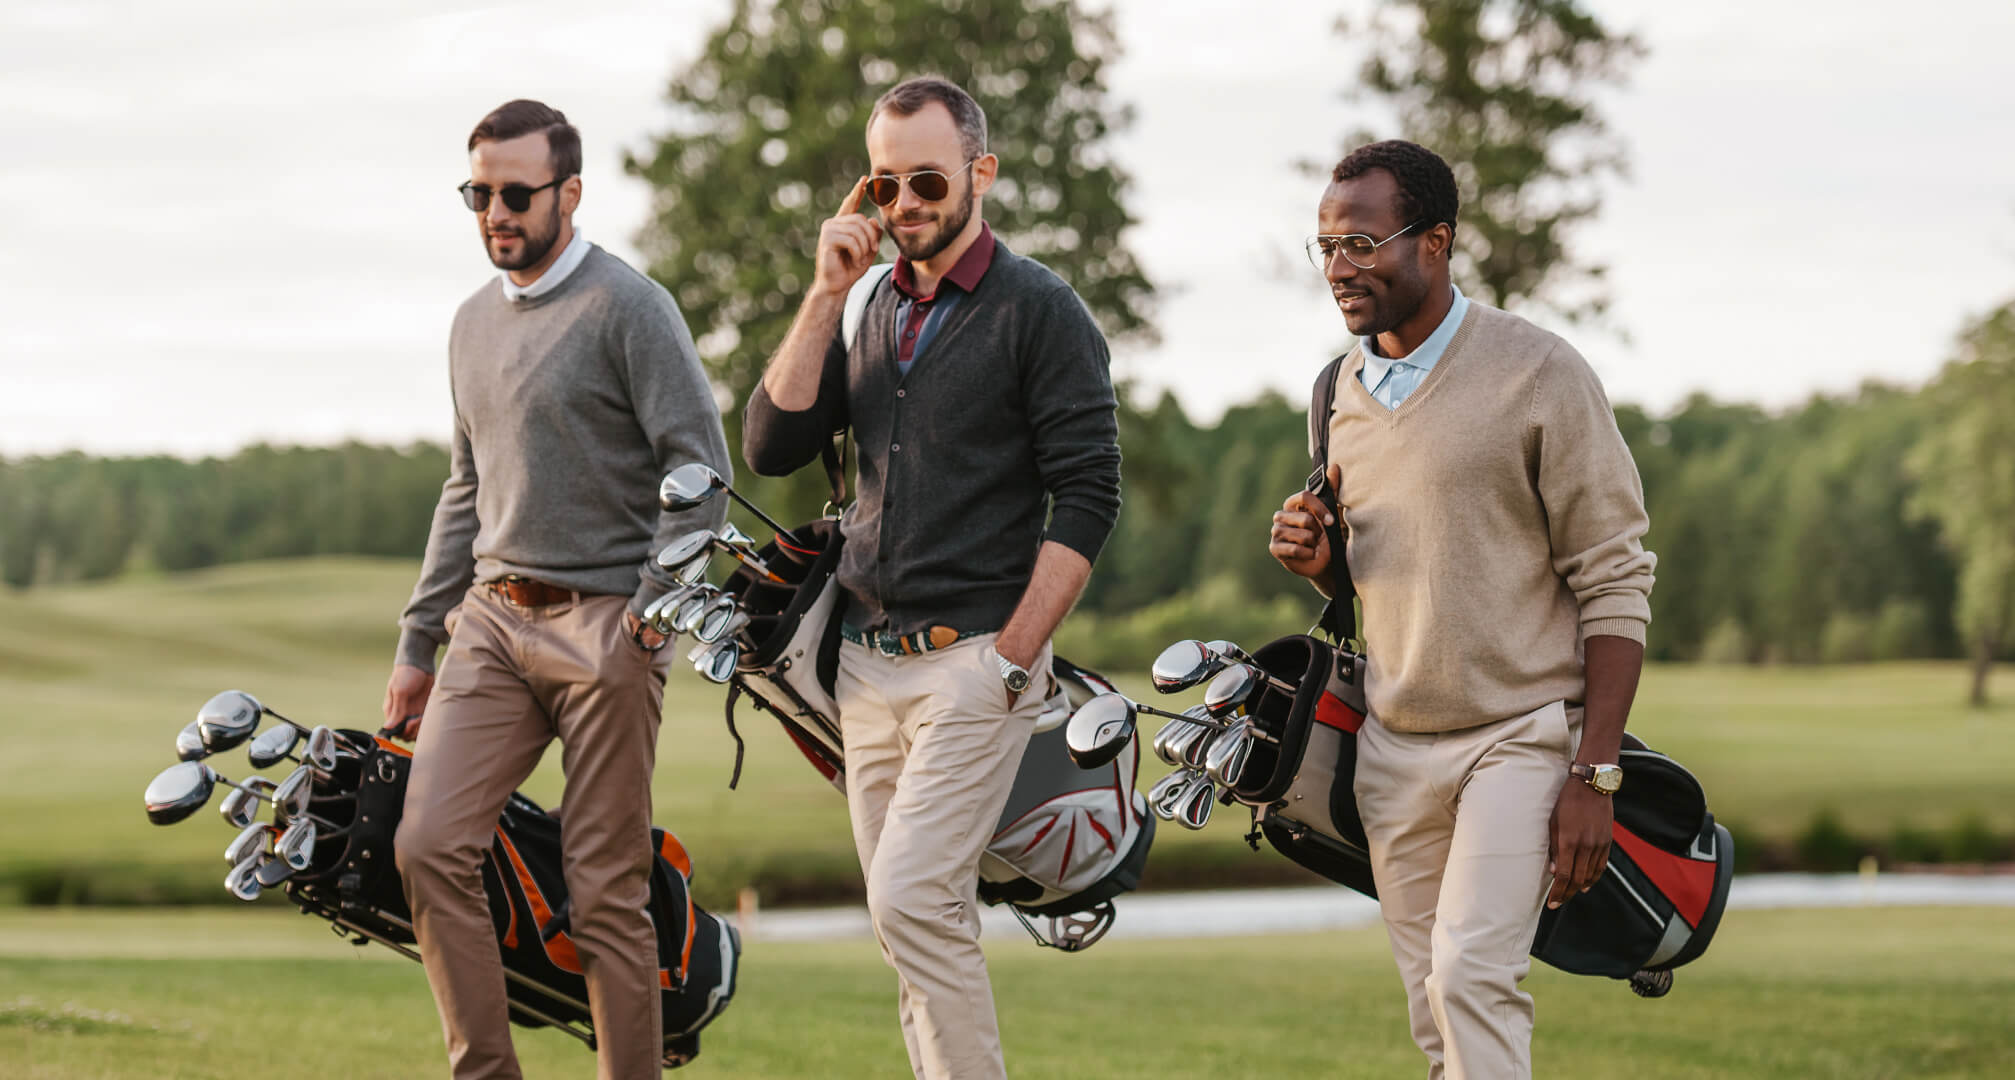 three people golfing with sunglasses and golf bags